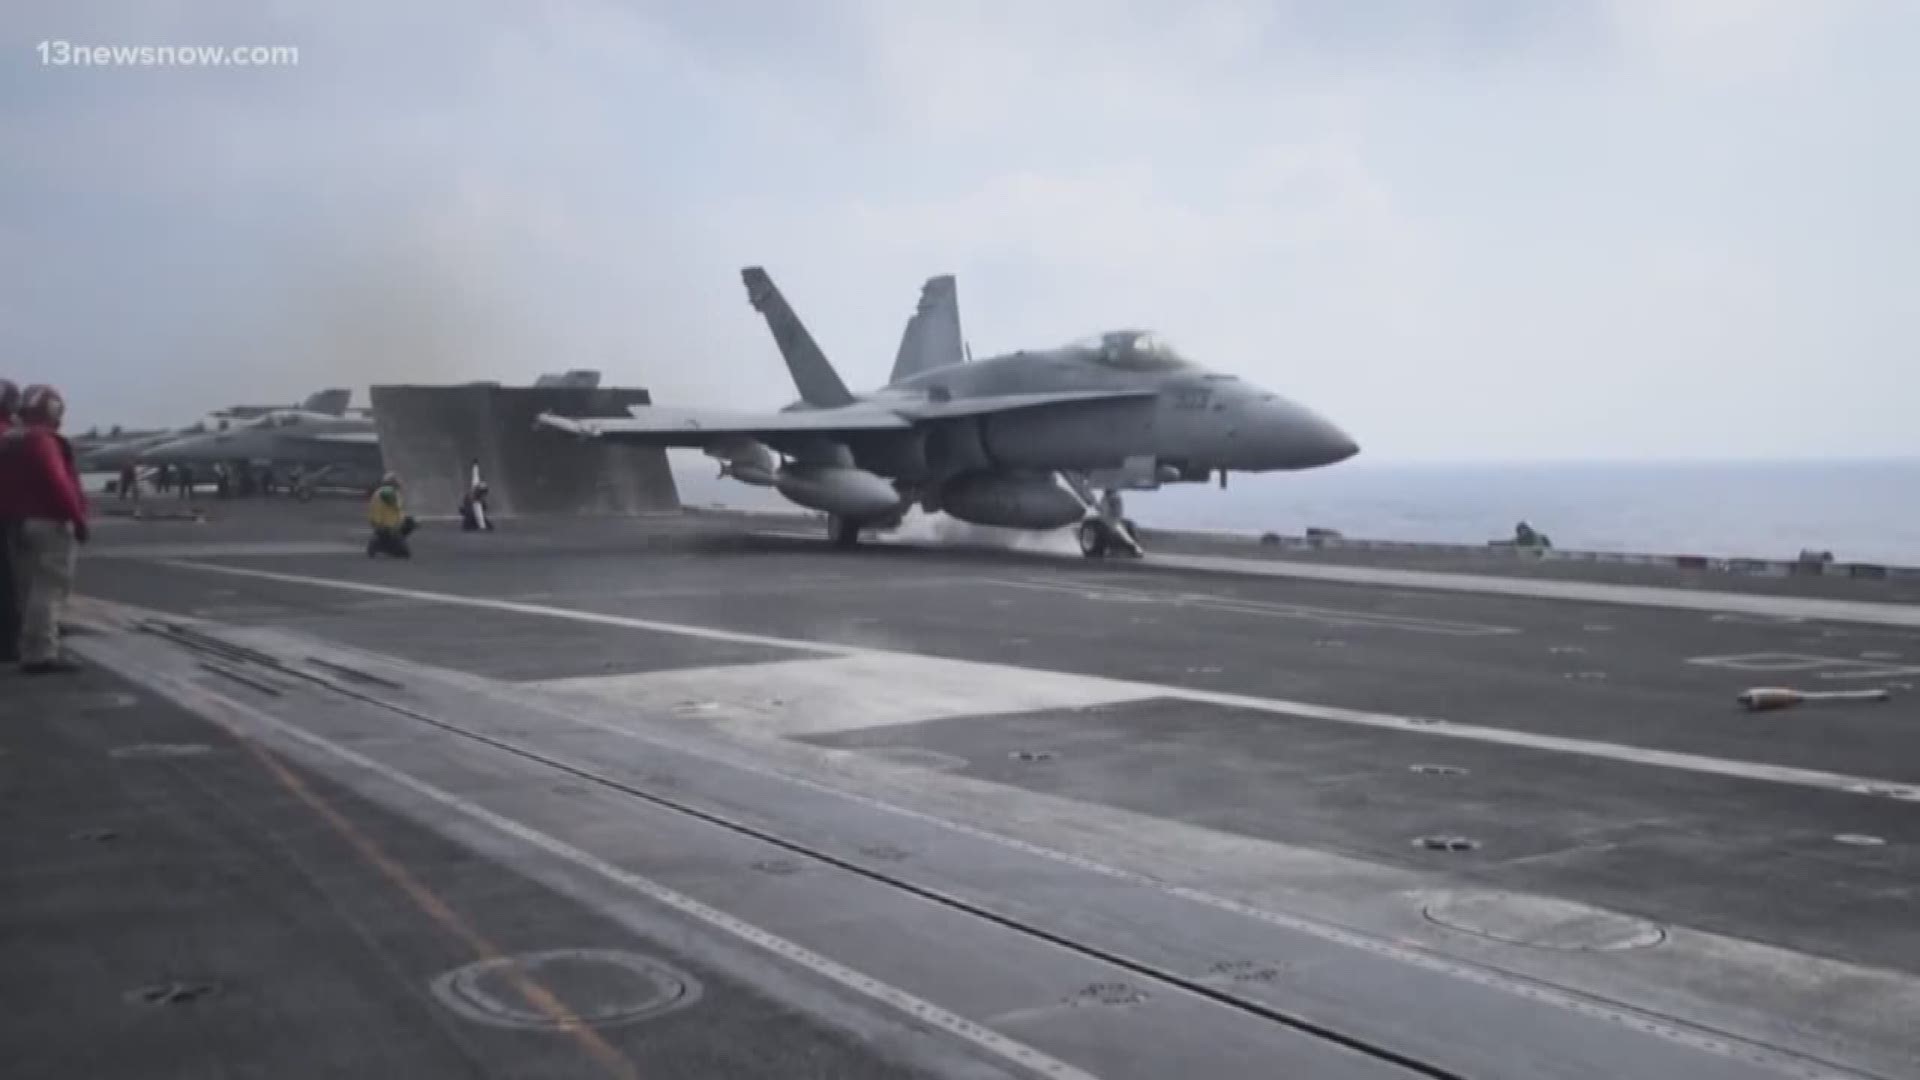 The new Gerald R. Ford class of carriers uses an electromagnetic launch system to put more jets into the air faster. President Donald Trump said the system is too sophisticated and expensive and wants to return to a steam launch system.